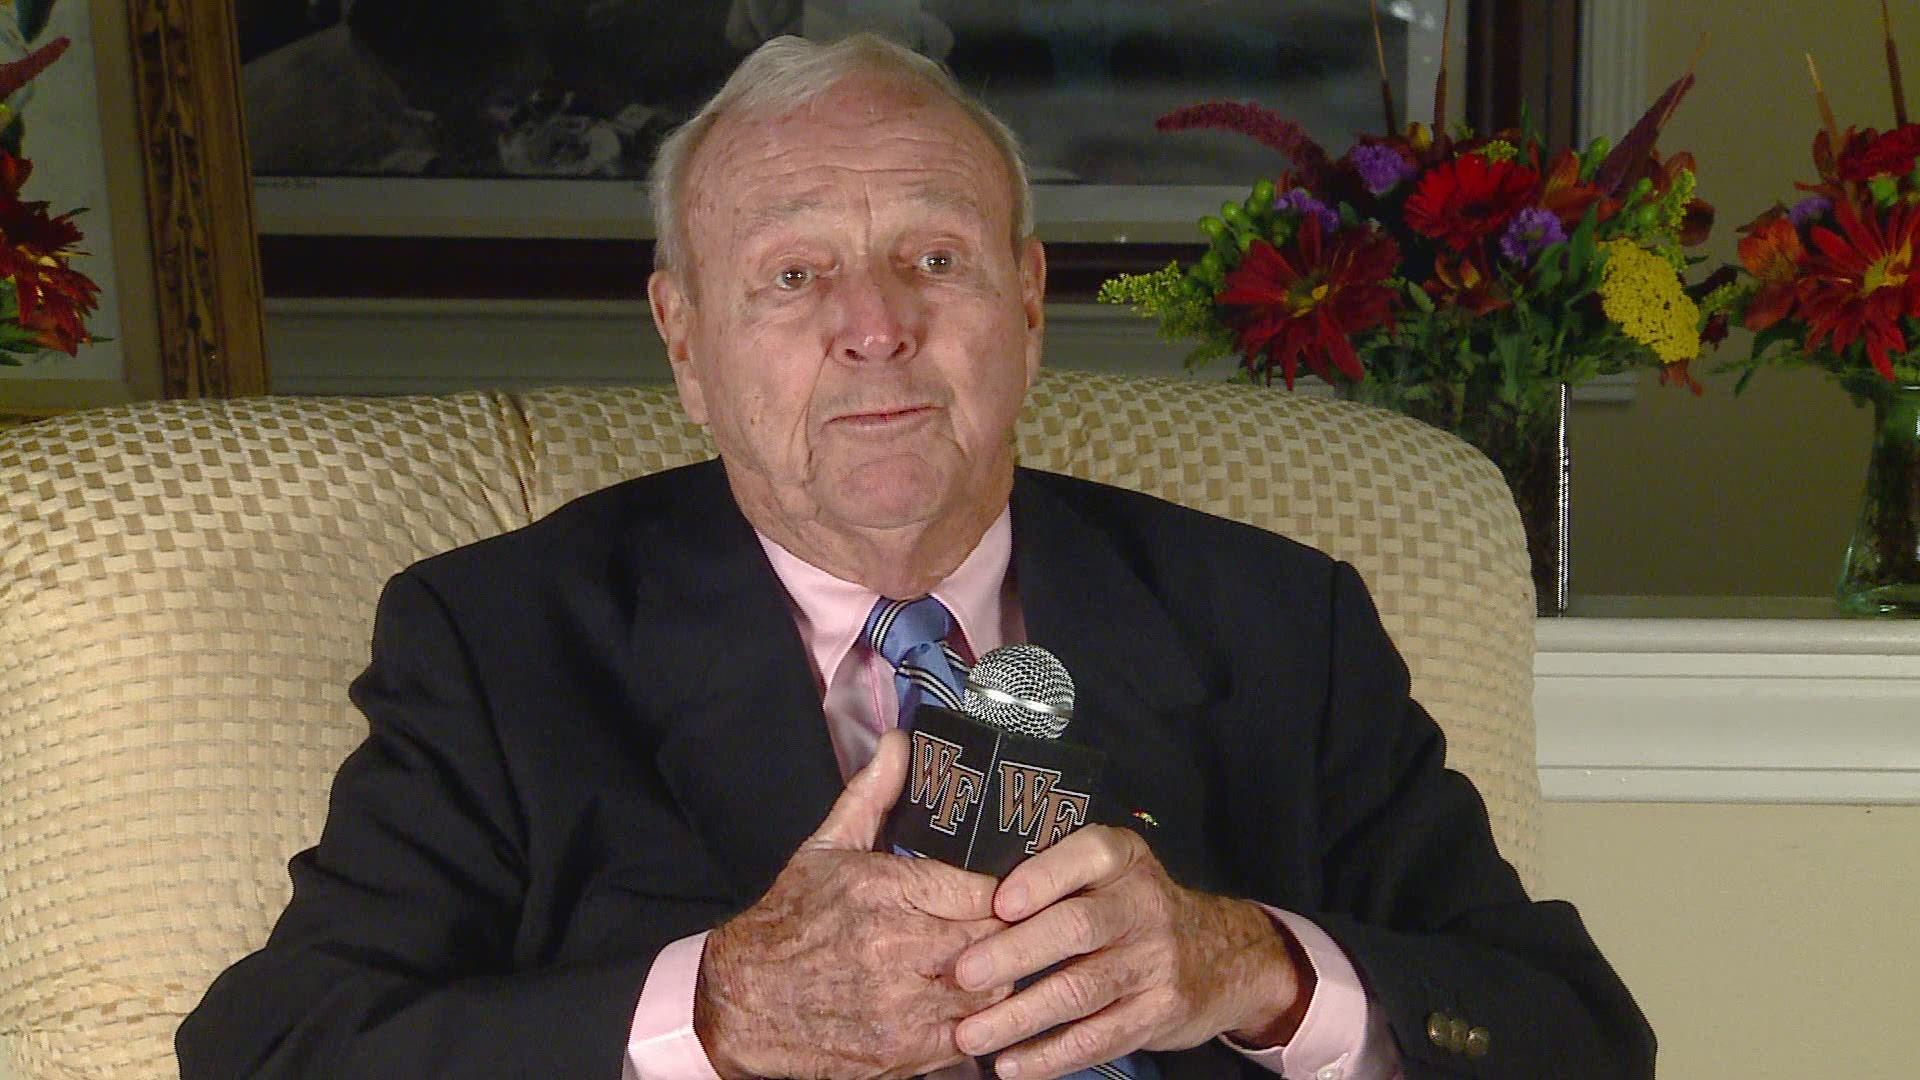 2013 Interview With Arnold Palmer After Statue Unveil At Wake Forest